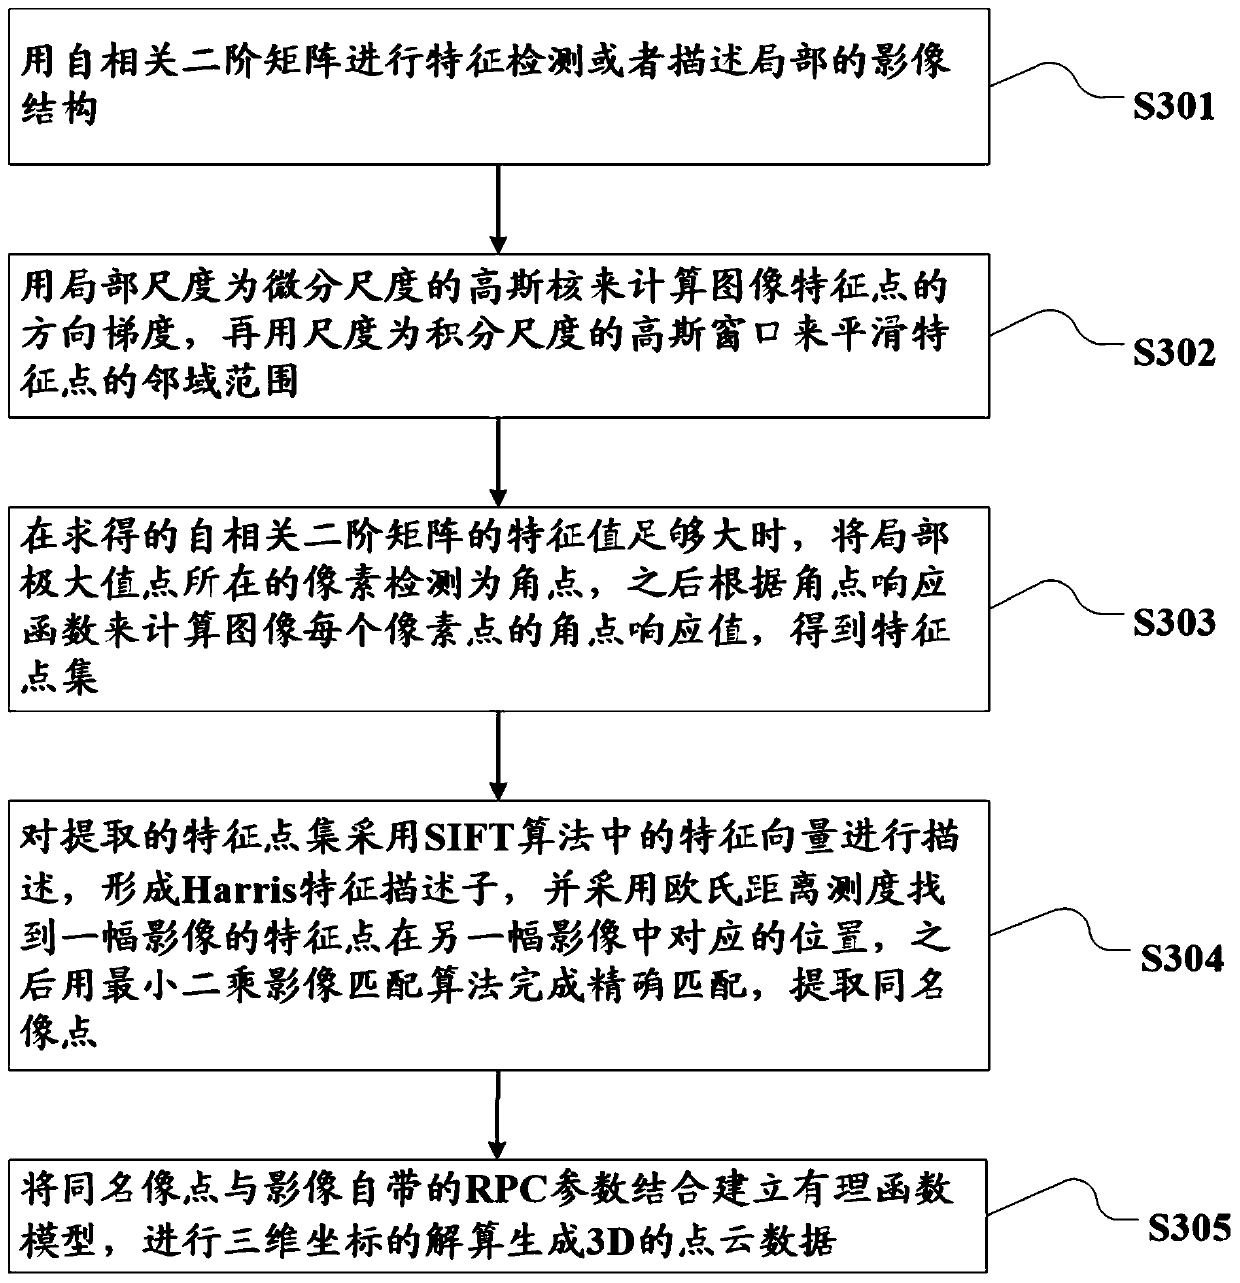 Urban agglomeration height space information and contour line extraction method